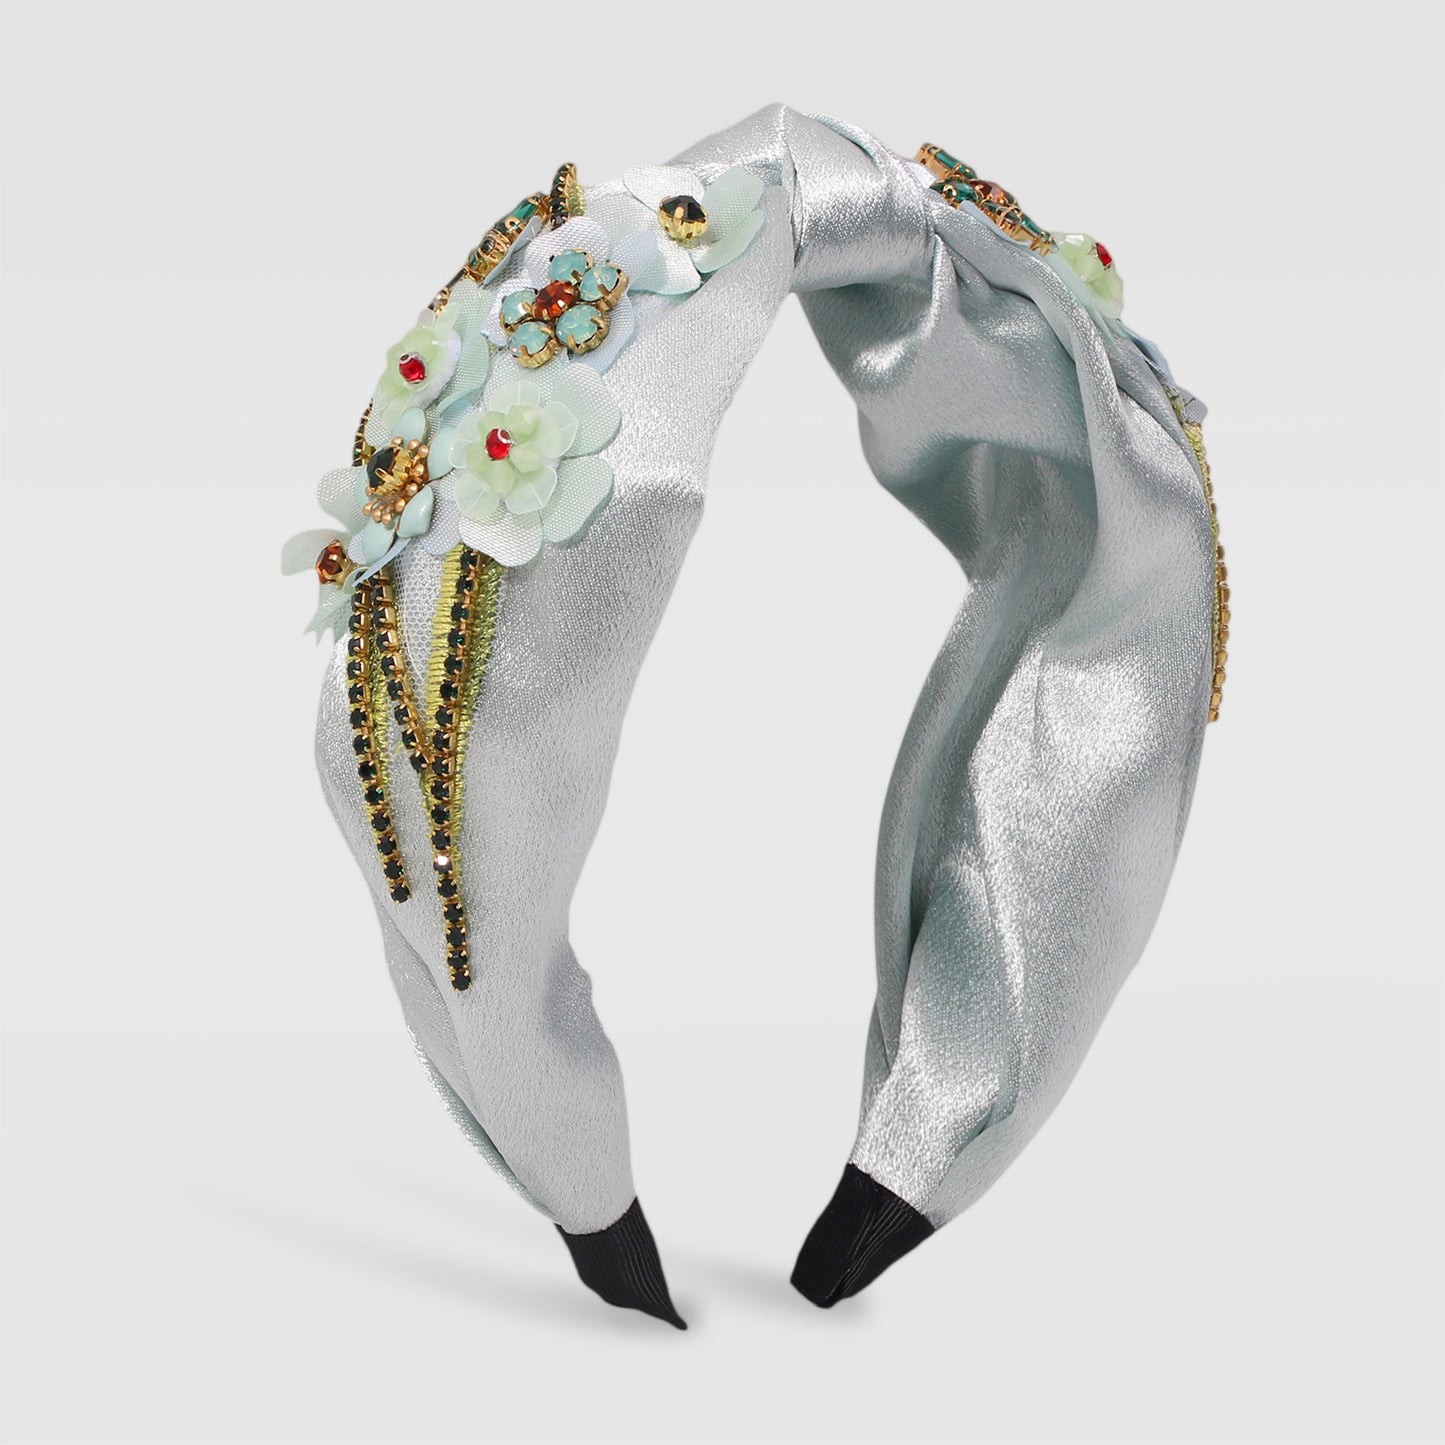 Topknot Spring Blossom Floral Embellished Wide Headband medyjewelry